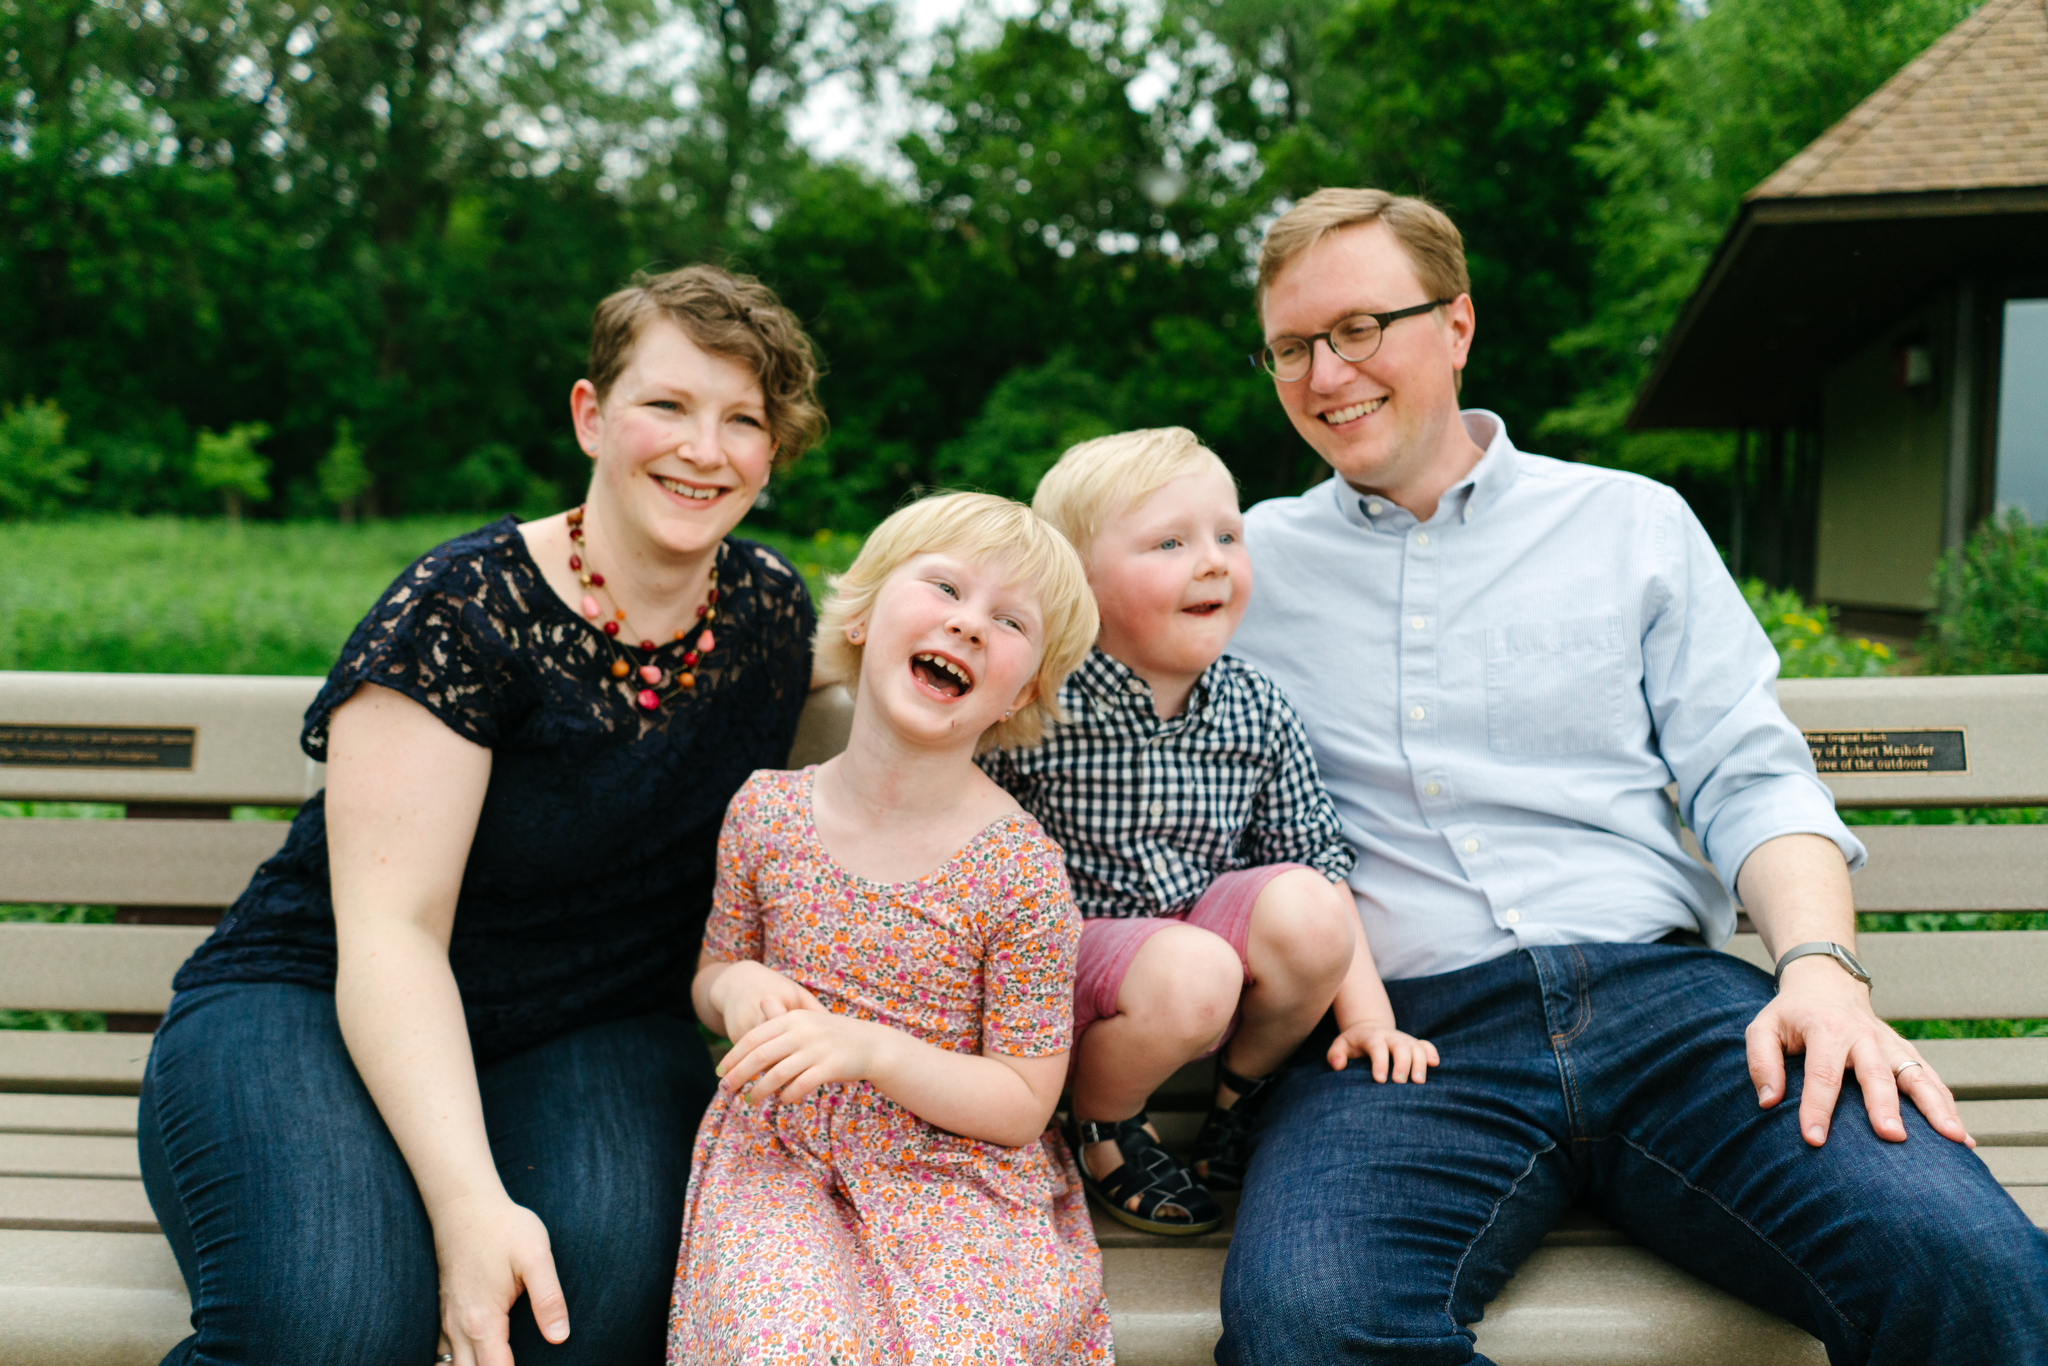 Family Portrait Session at Wood Lake Nature Center in Richfield, Minnesota